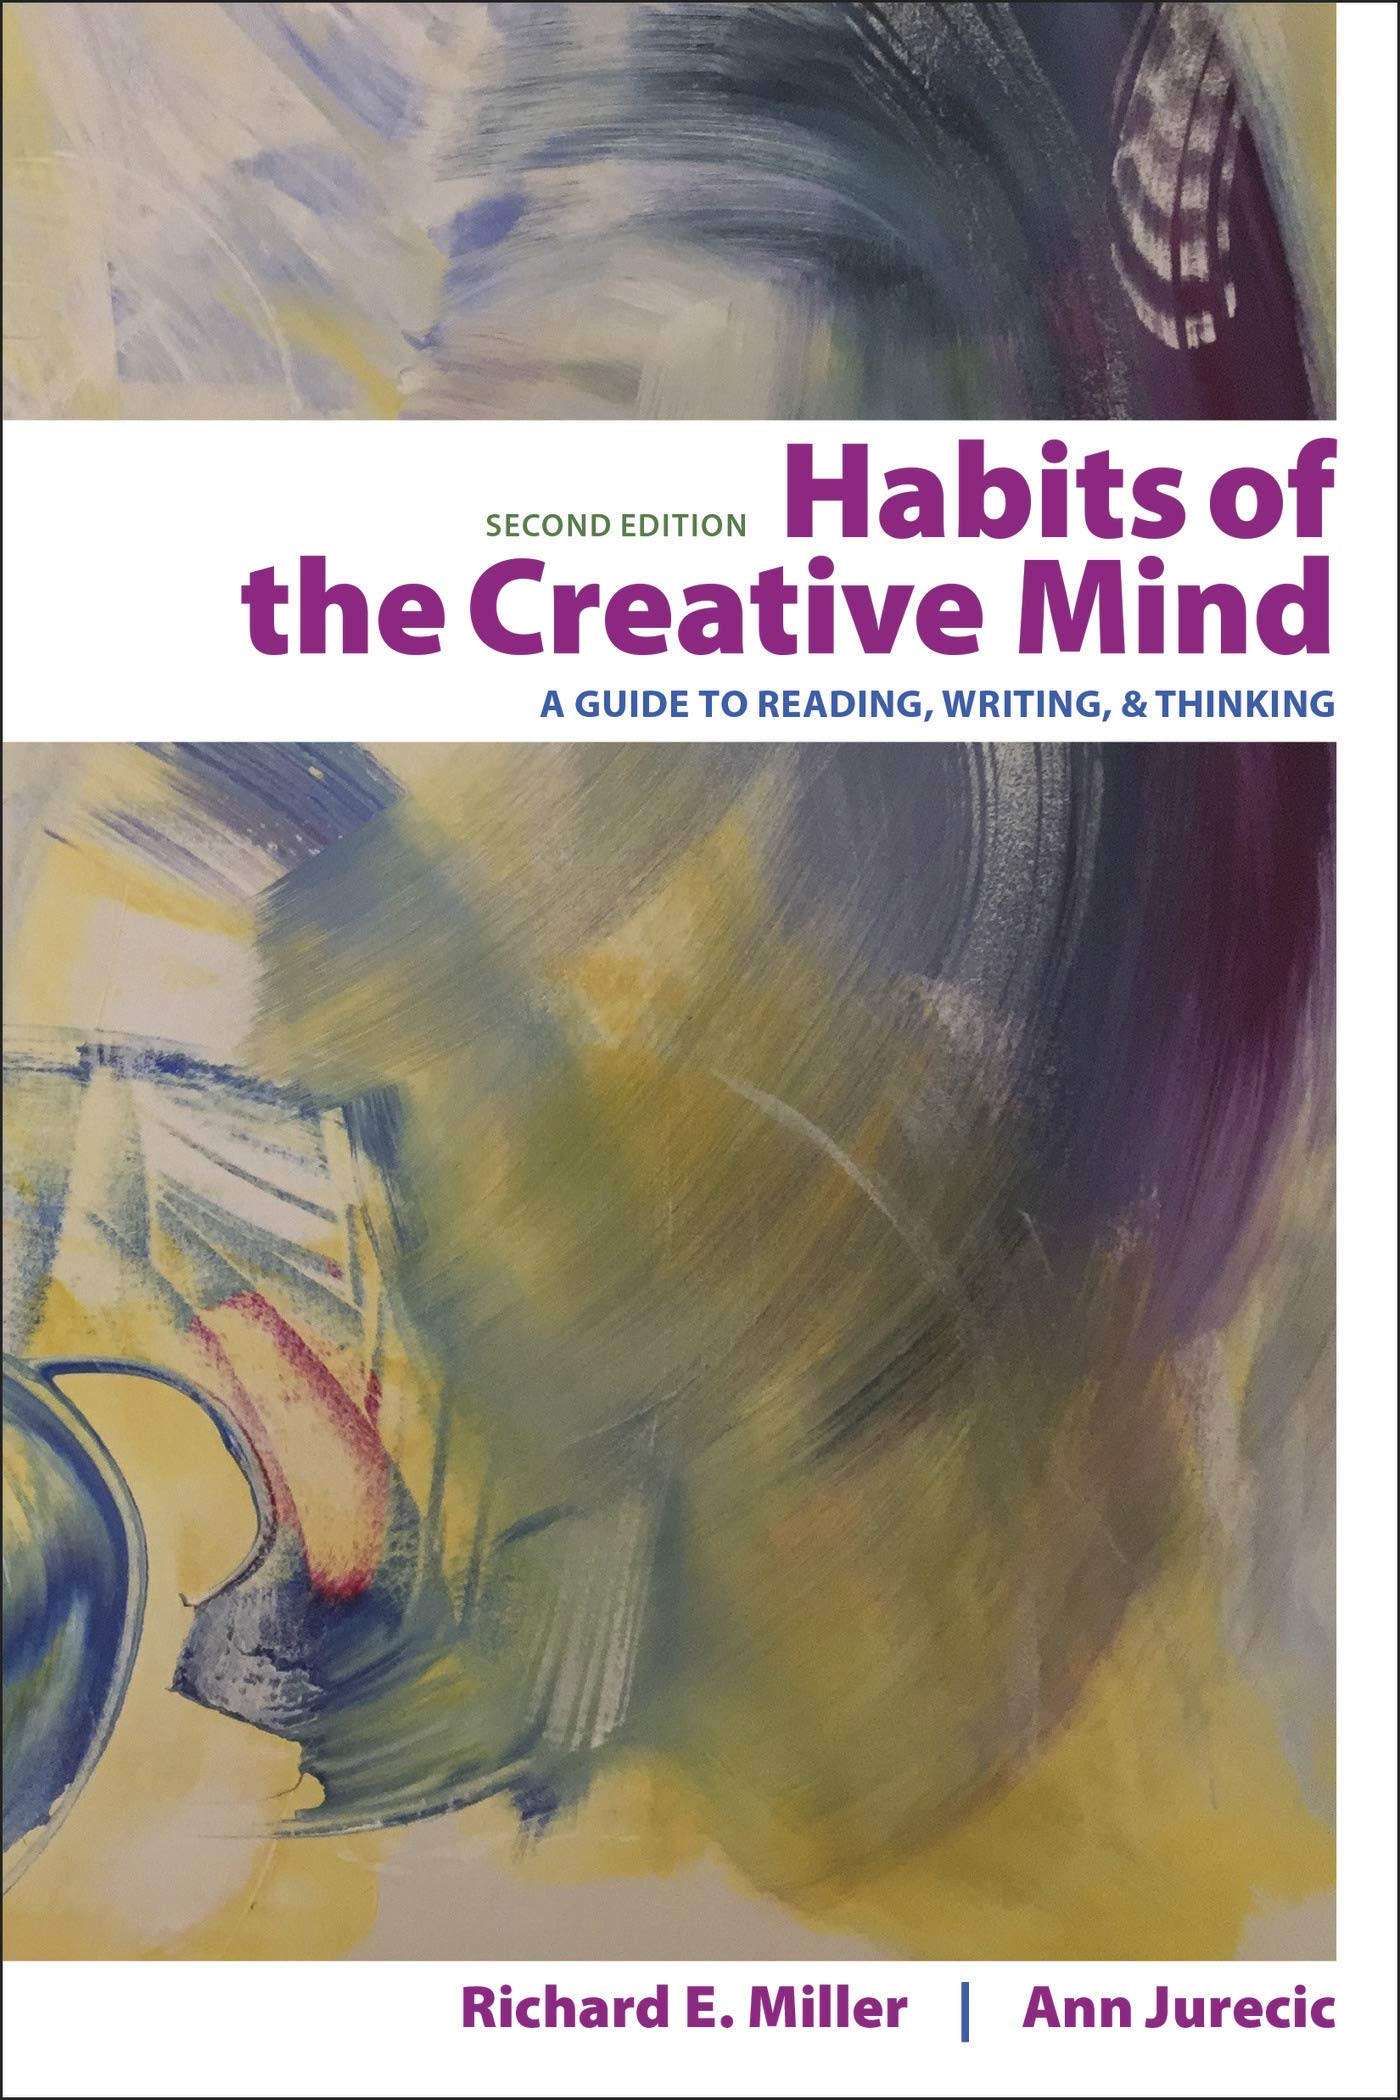 Habits of the Creative Mind: A Guide to Reading, Writing, and Thinking